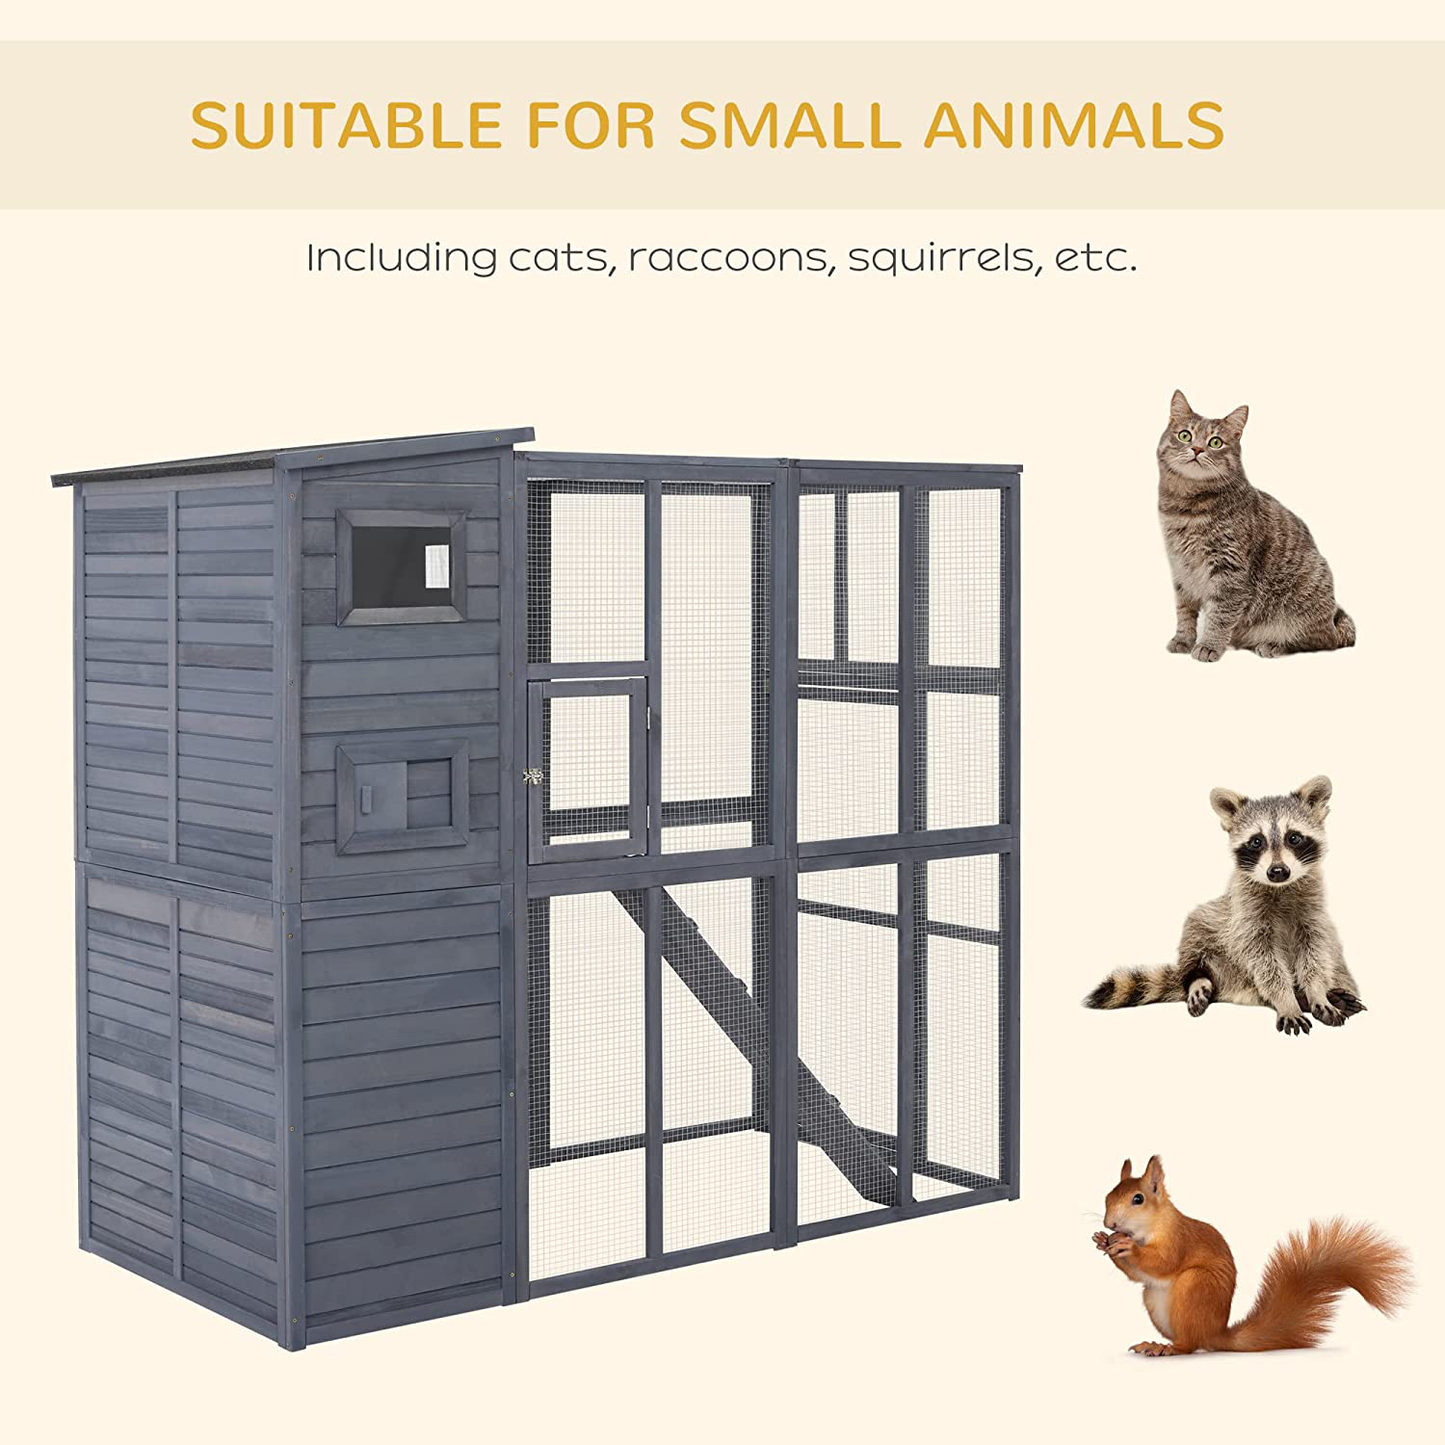 Pawhut Large Wooden Outdoor Cat House with Large Run for Play, Catio for Lounging, and Condo Area for Sleeping, Grey